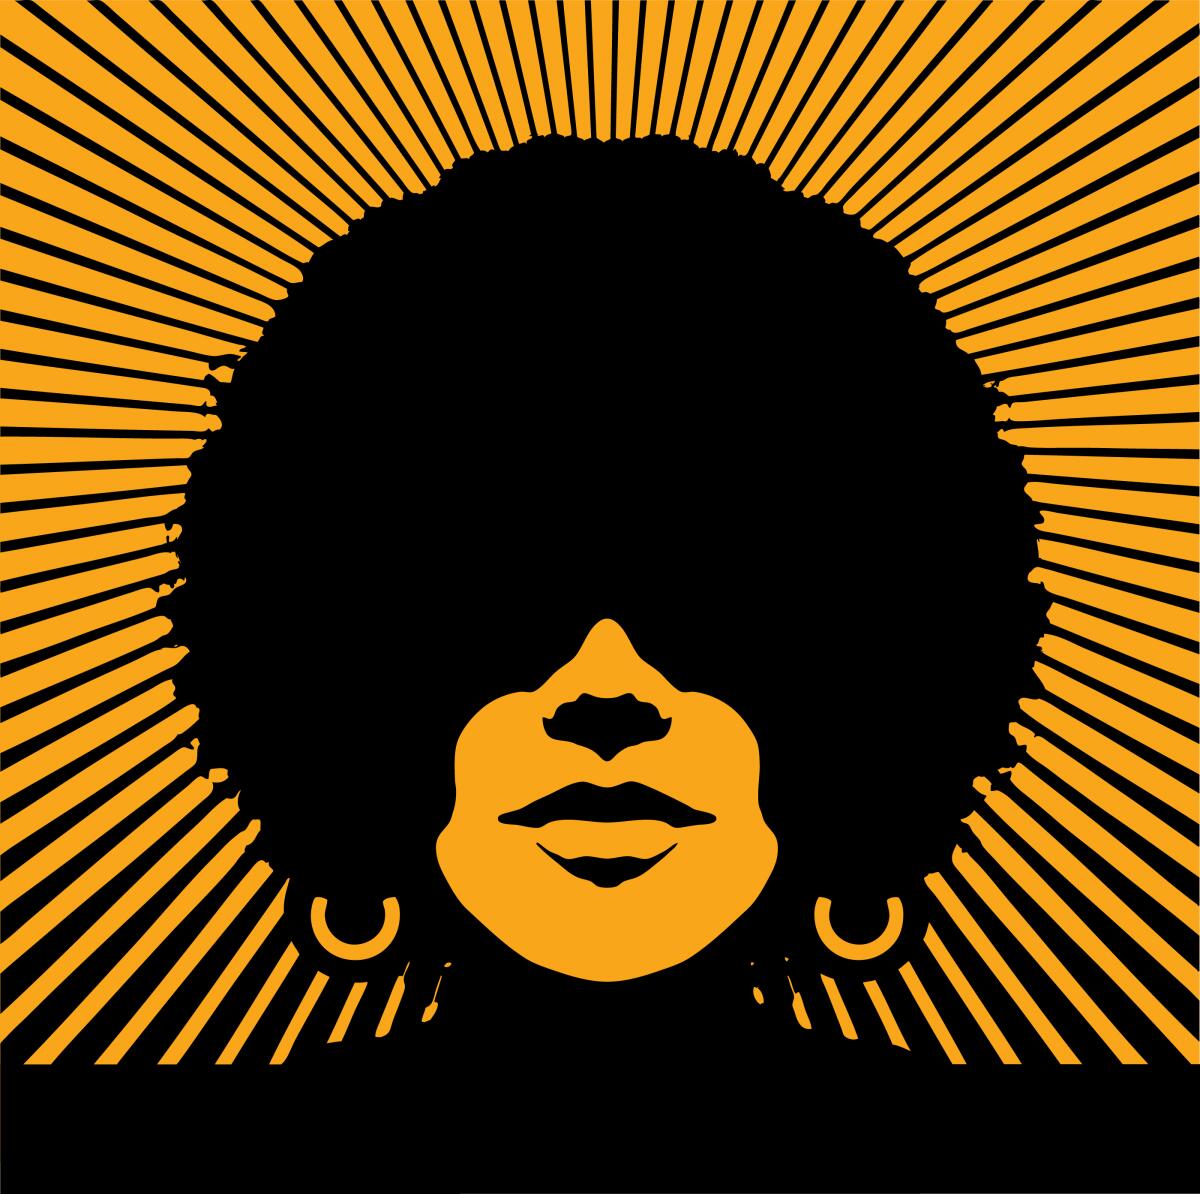 A woman's head in silhouette with sunbeams. 